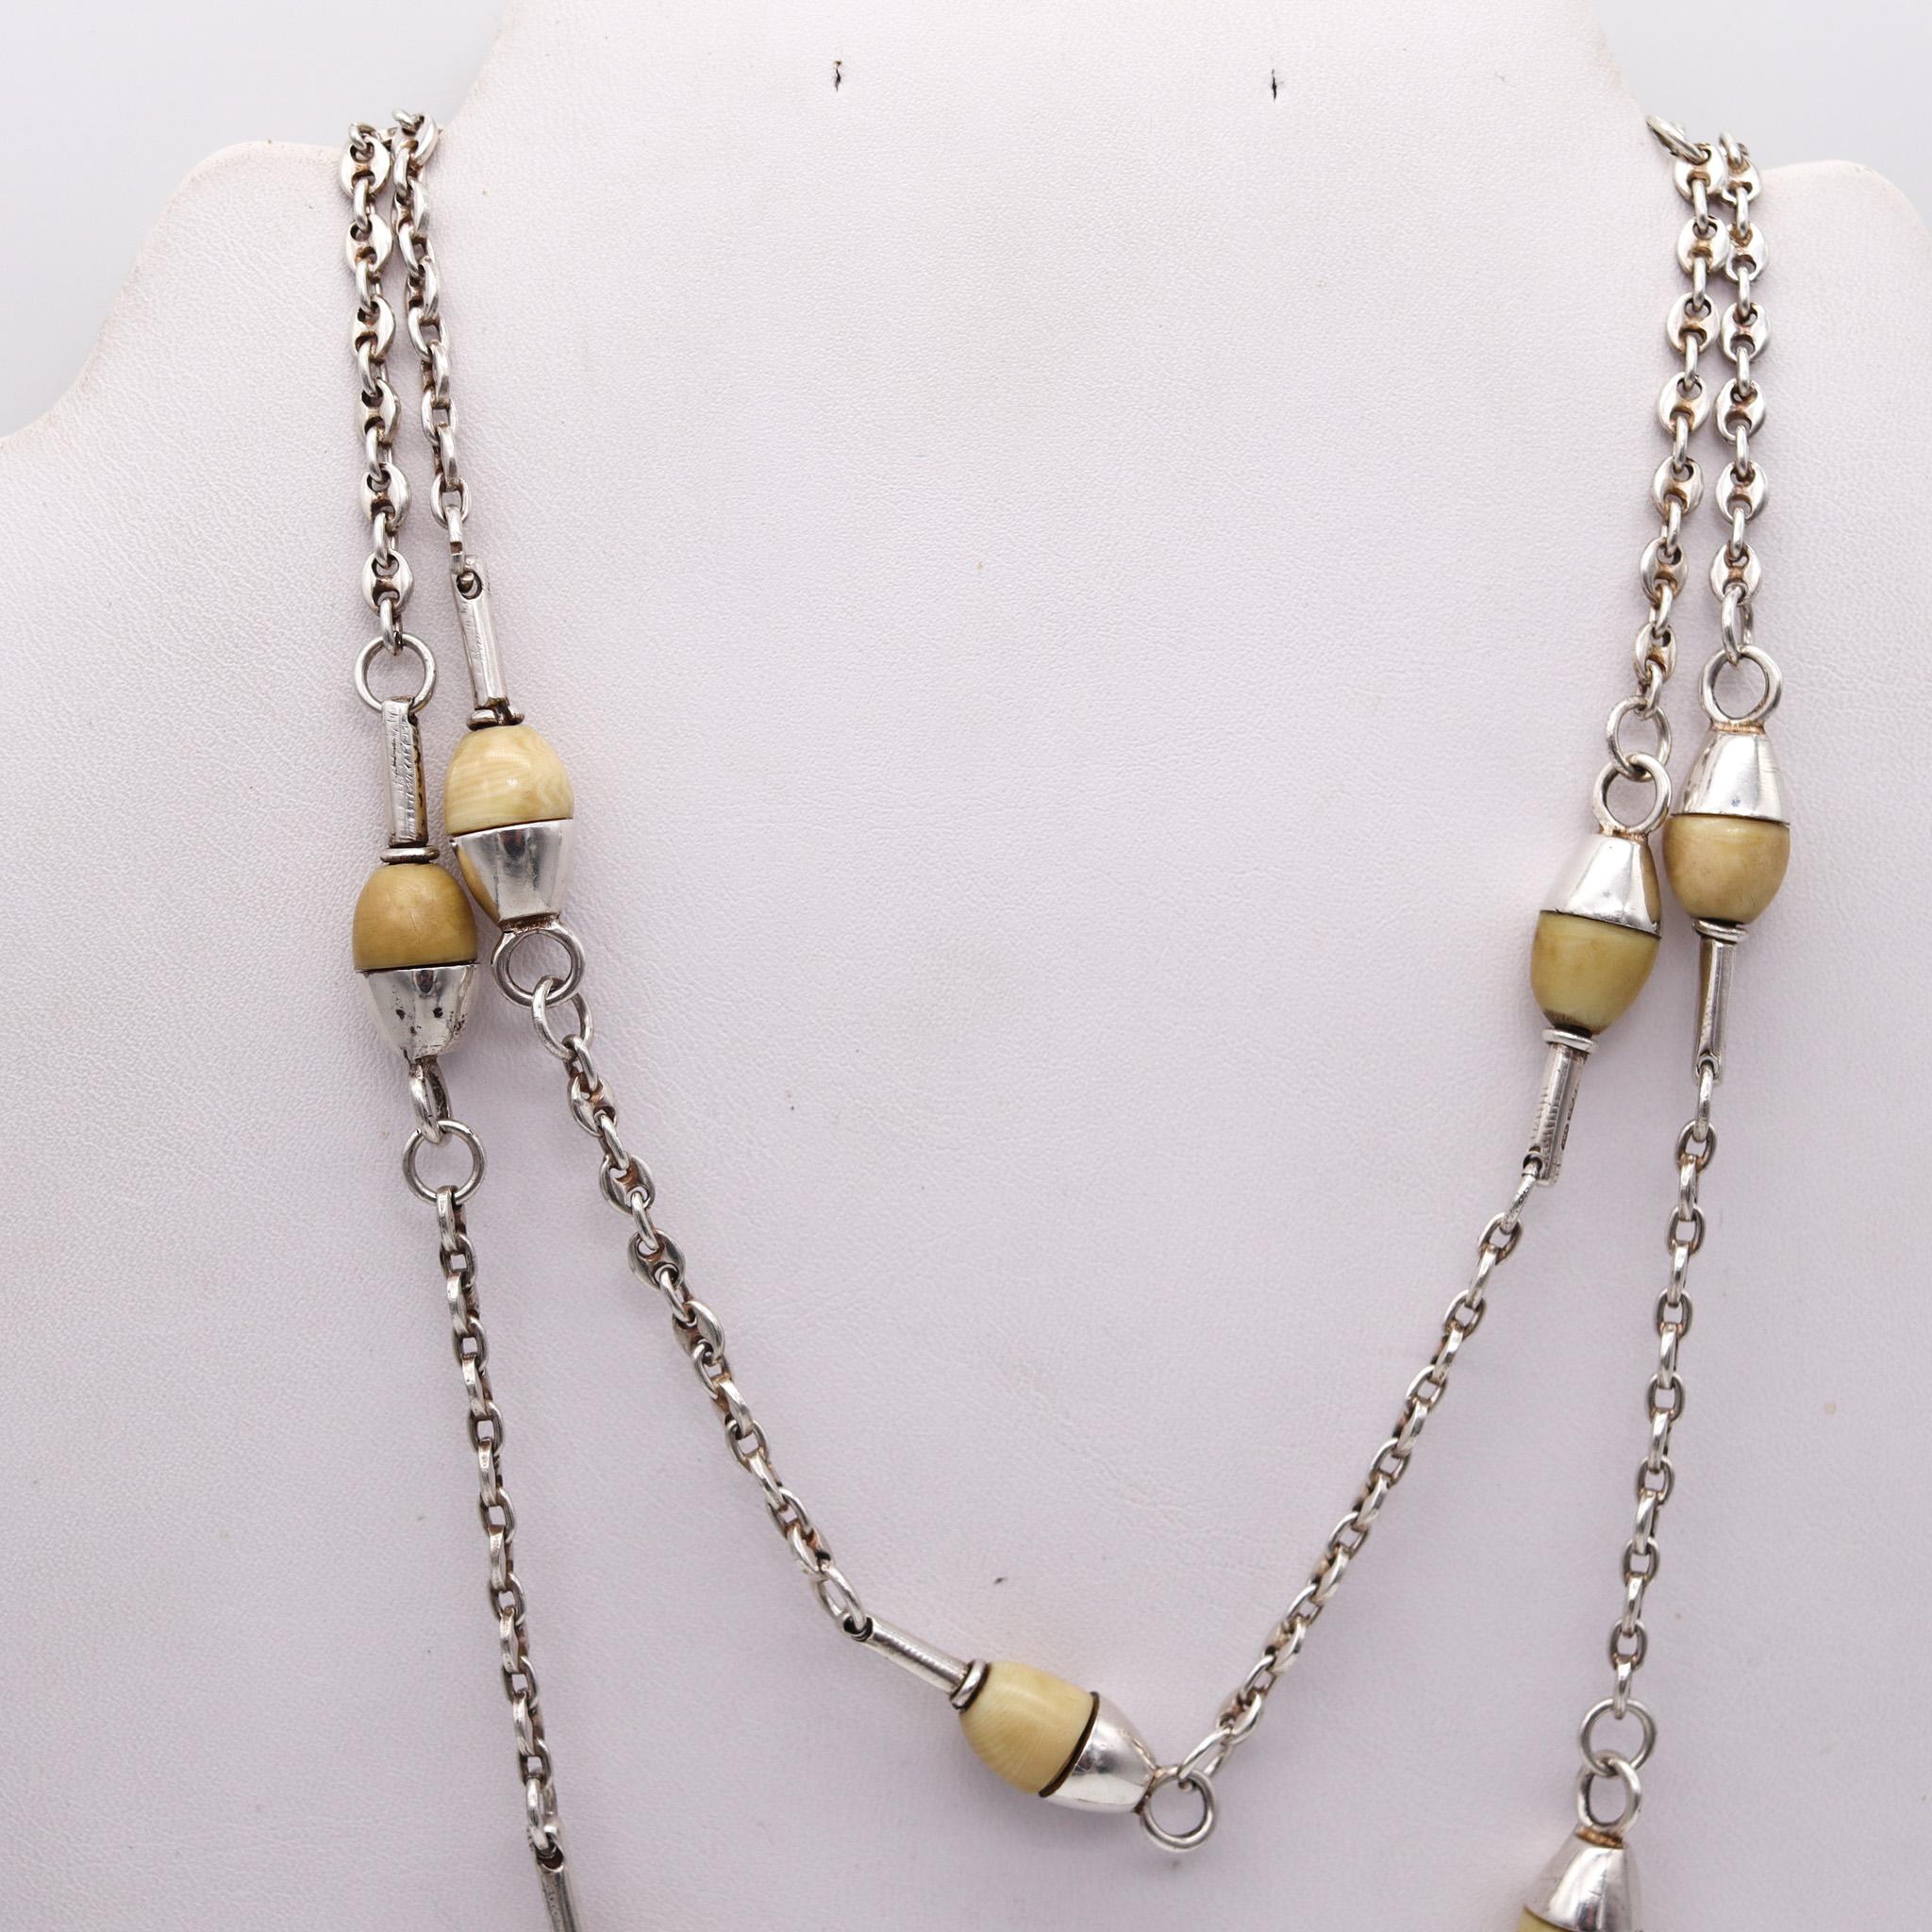 Modernist long sautoir necklace made in Arezzo.

Retro modernist long necklace, created in the city of Arezzo Italy, back in the 1960. Crafted as a long chain sautoir in solid .925/.999 sterling silver. The chain's sections with the Gucci links, are